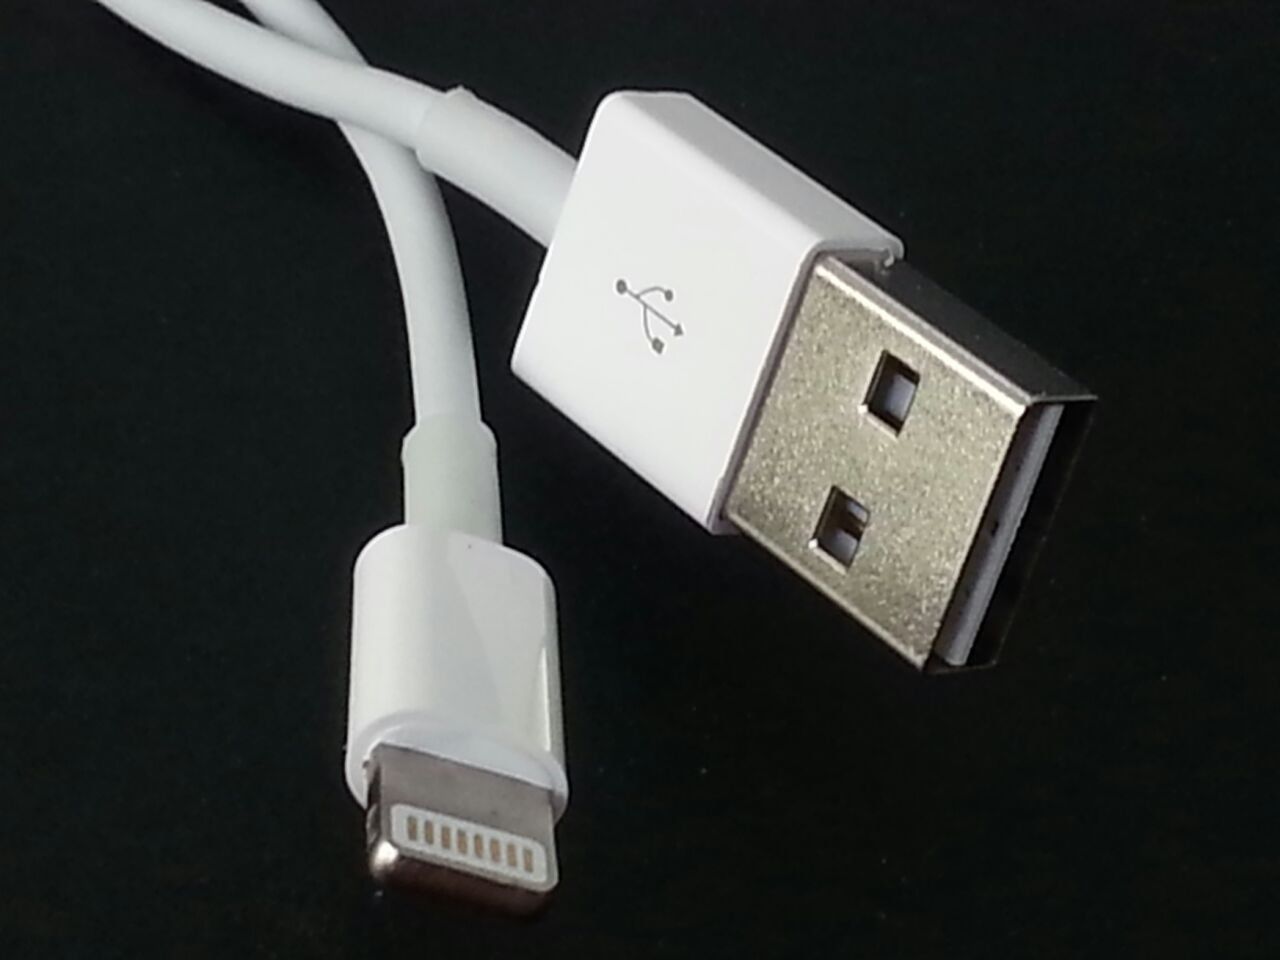 will usb iphone 5 cable works on iphone 6?